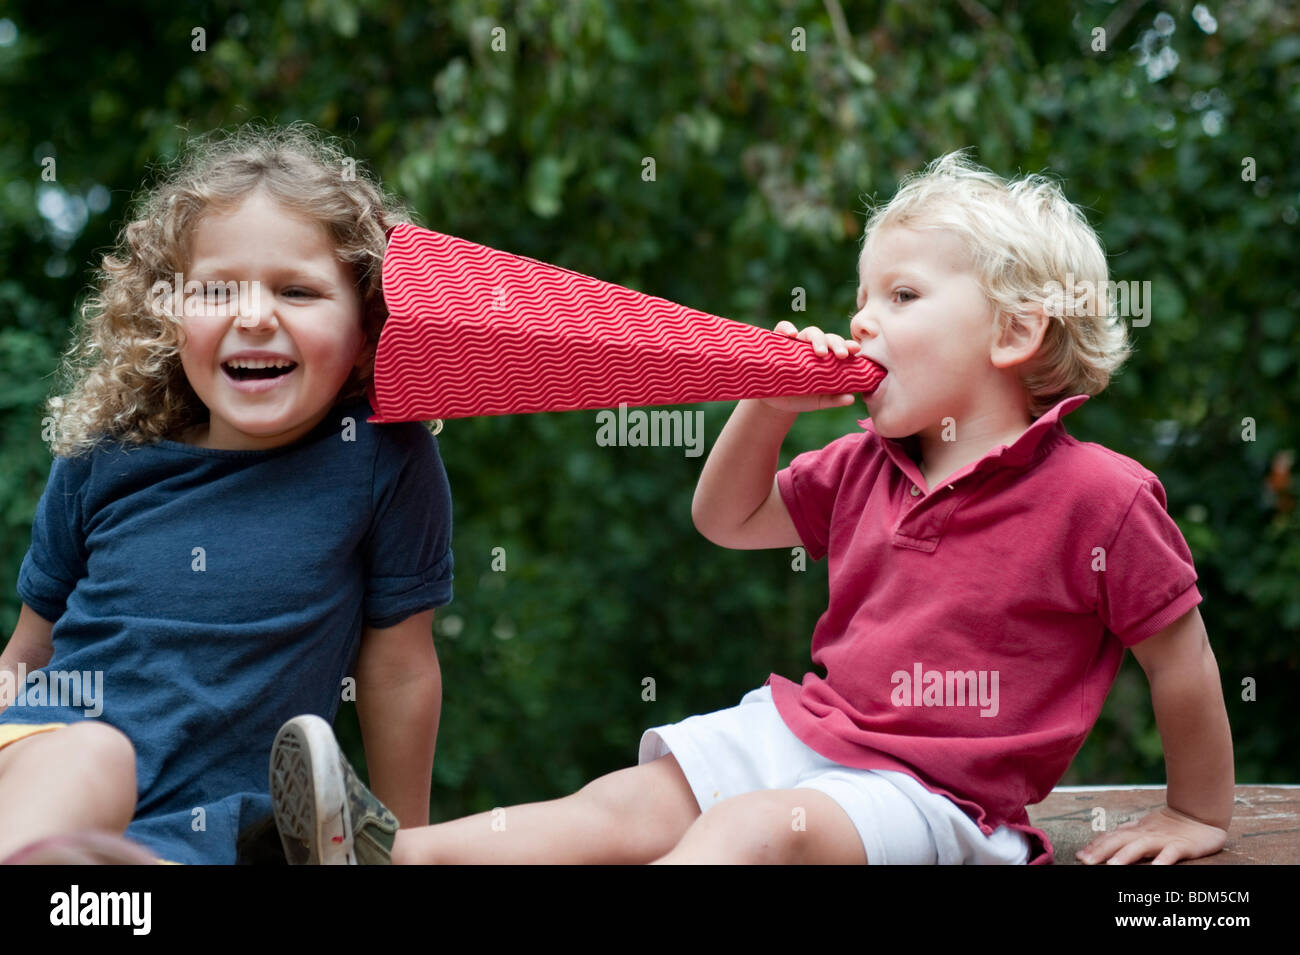 Two young children talking and laughing using homemade megaphone Stock Photo